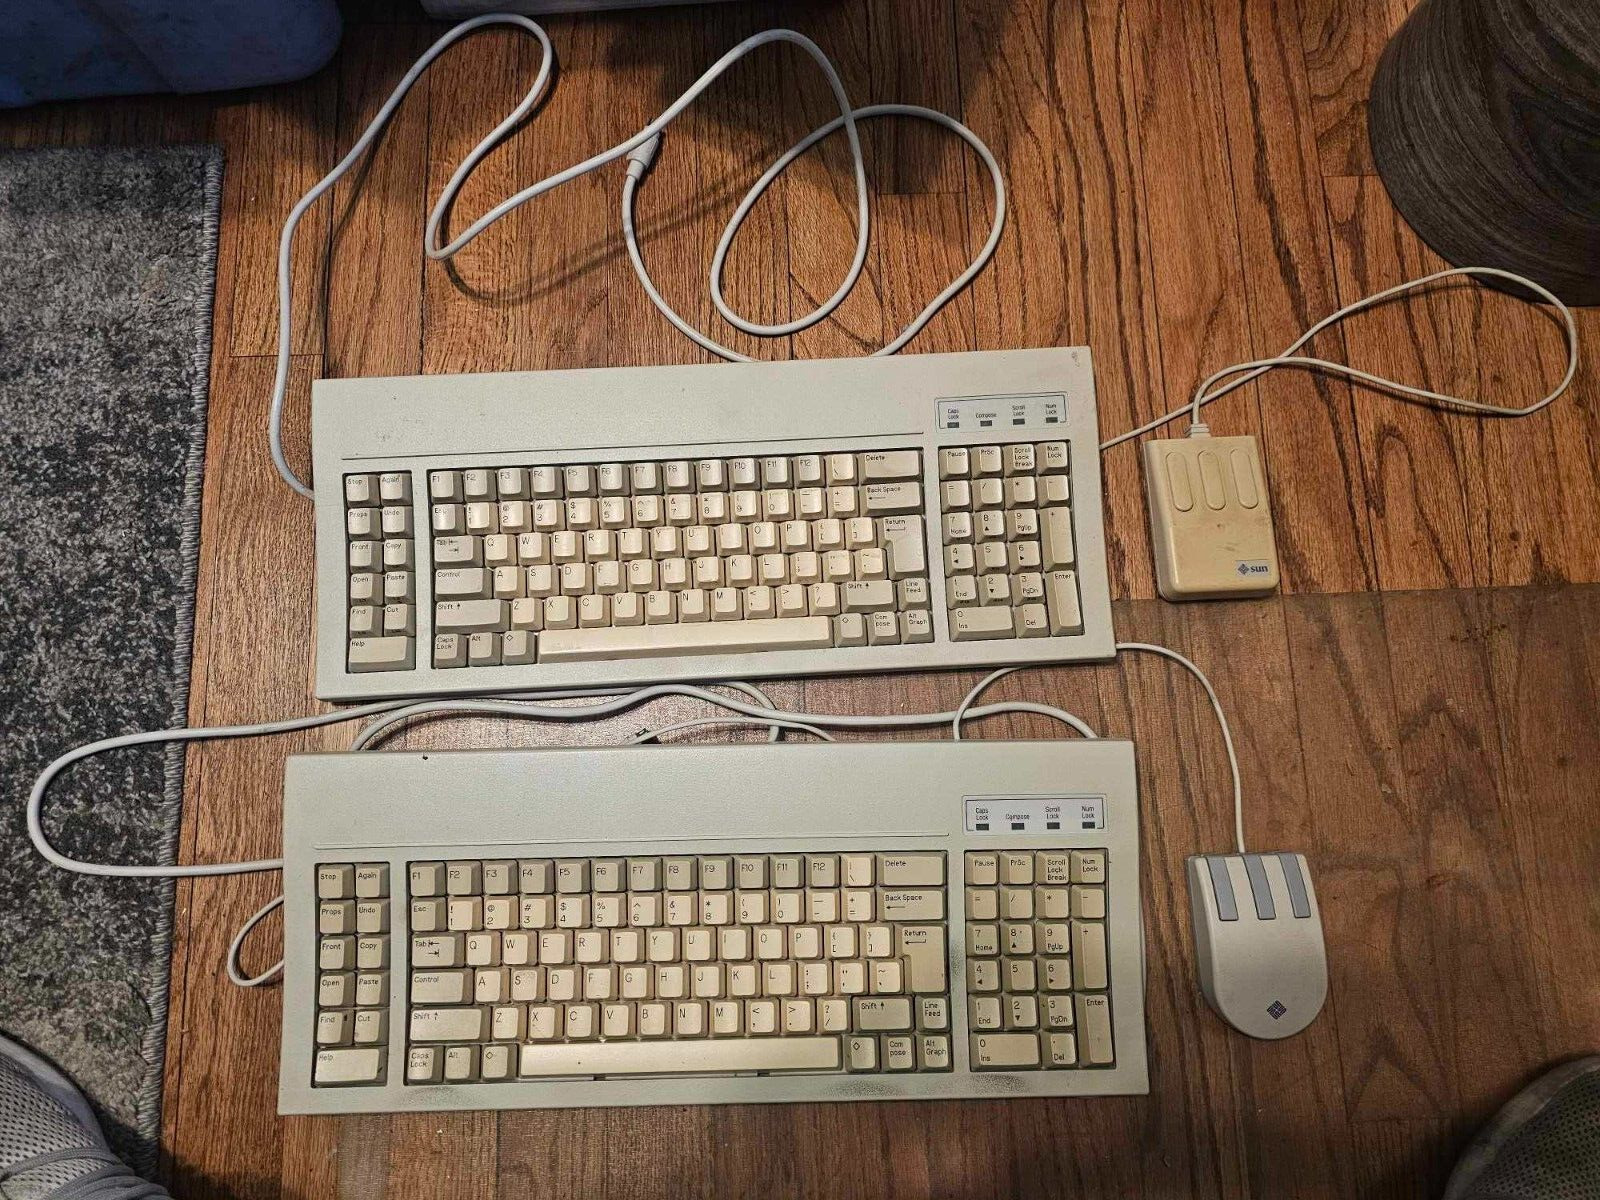 2x Combo Rare Vintage Clean Sun Microsystems Keyboard Type4 and Mouse M4 + Type5